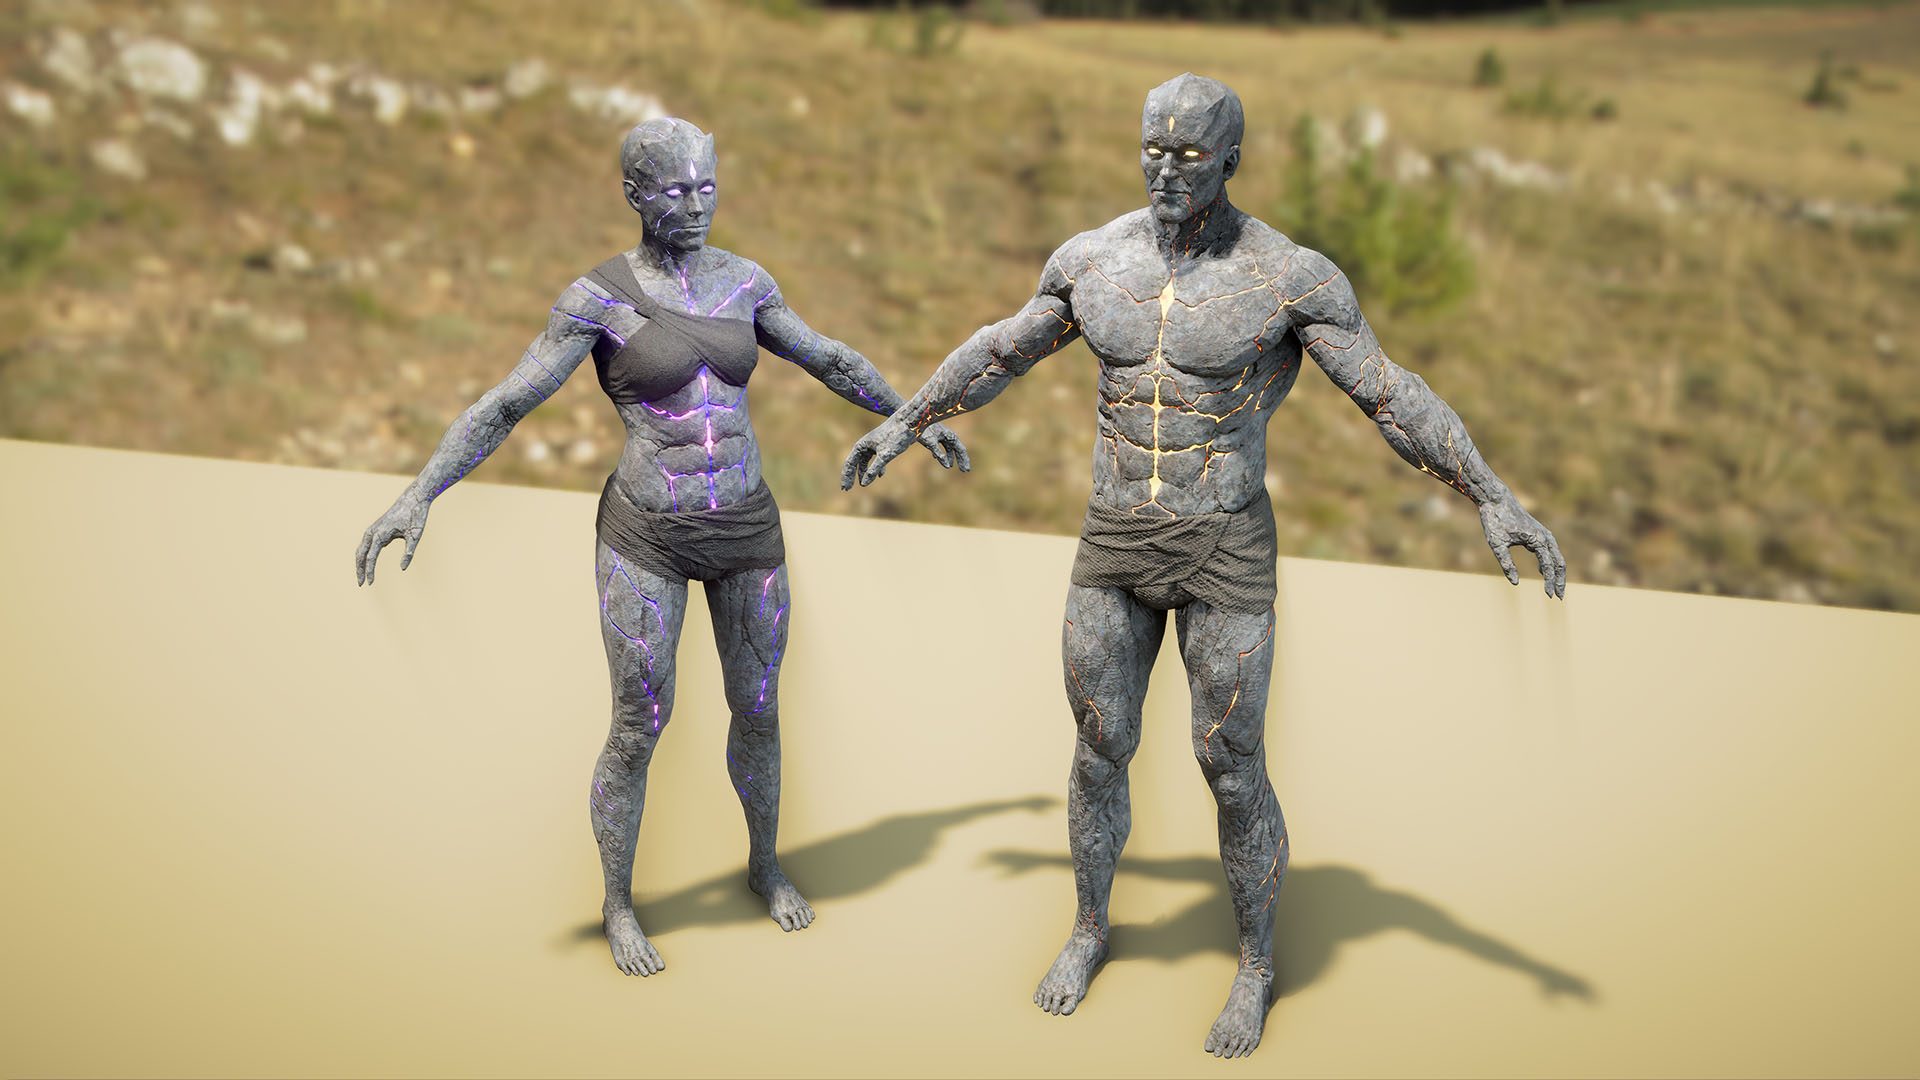 2020-Mar 6: render of female and male Archai character models